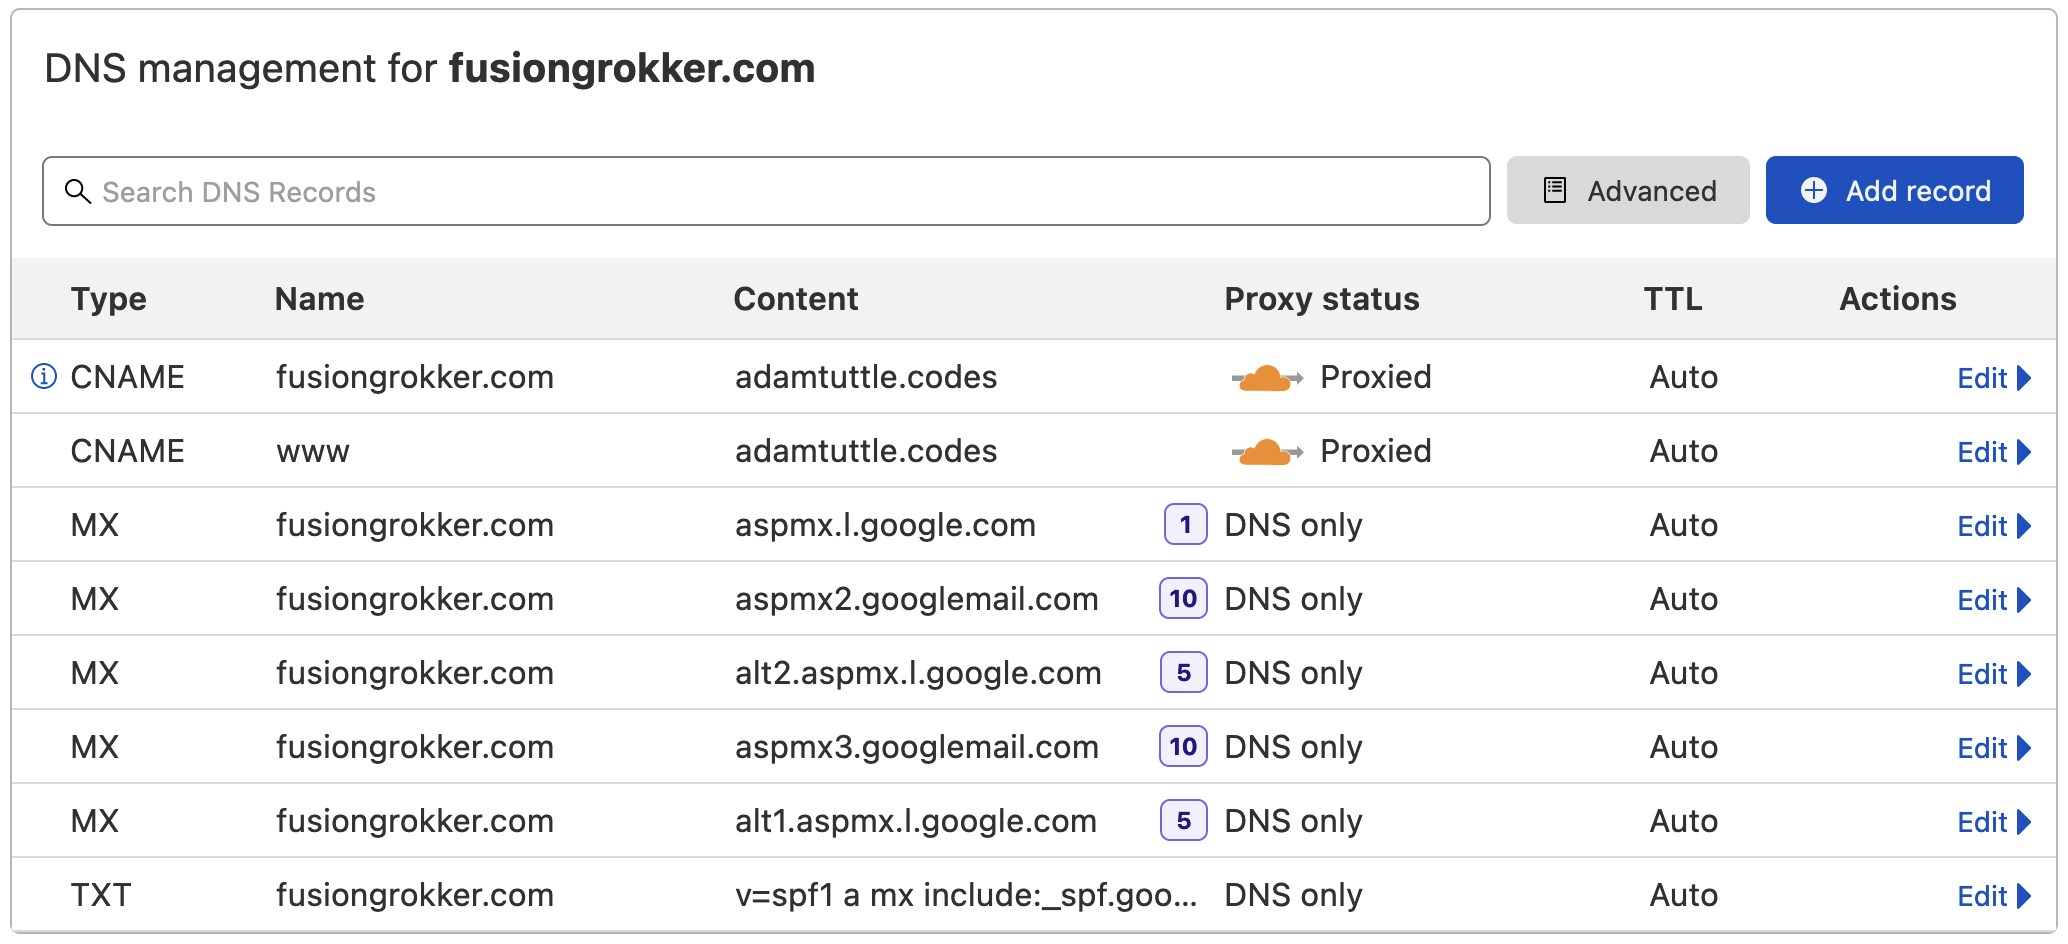 DNS configuration for fusiongrokker.com, showing MX records pointing to various googlemail.com domains